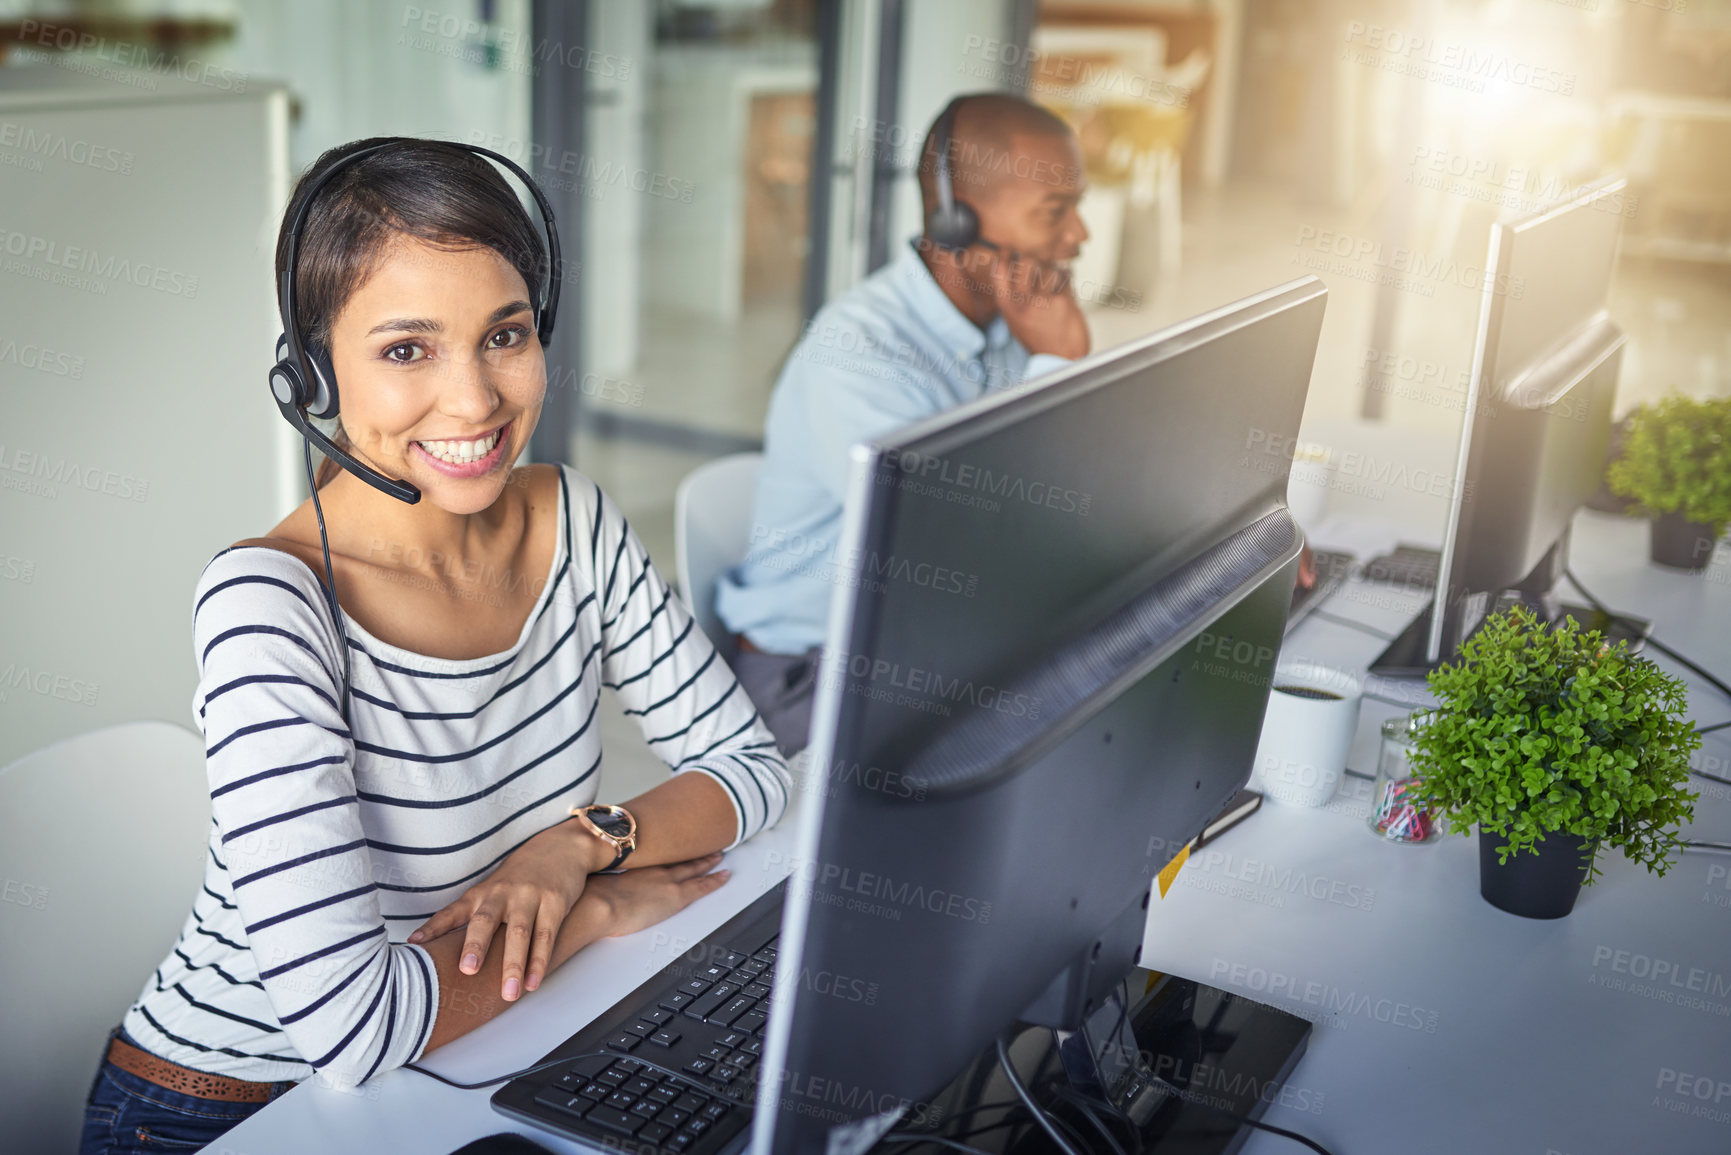 Buy stock photo Cropped shot of a young attractive female customer support agent working in the office